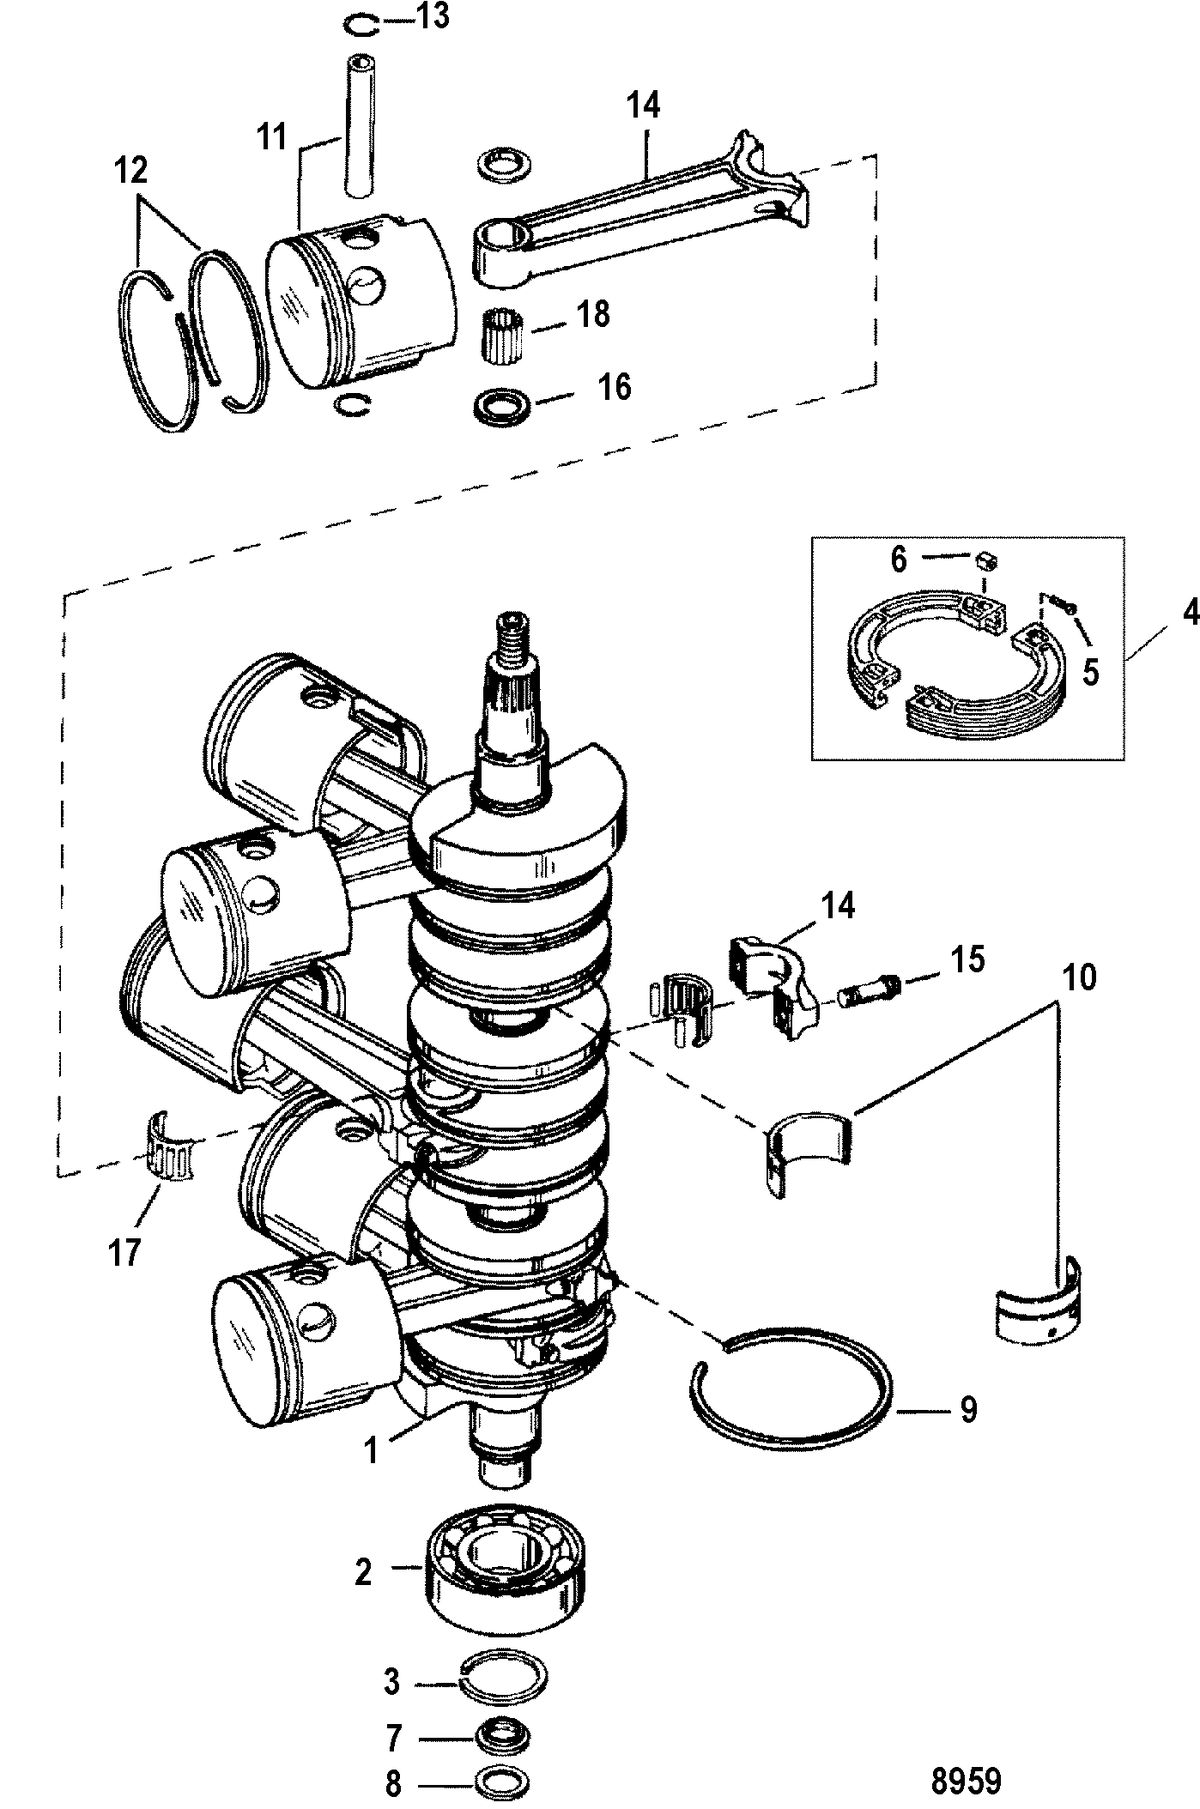 RACE OUTBOARD 150/200 PRO-MAX/SUPER MAGNUM (EFI) Crankshaft, Pistons and Connecting Rods